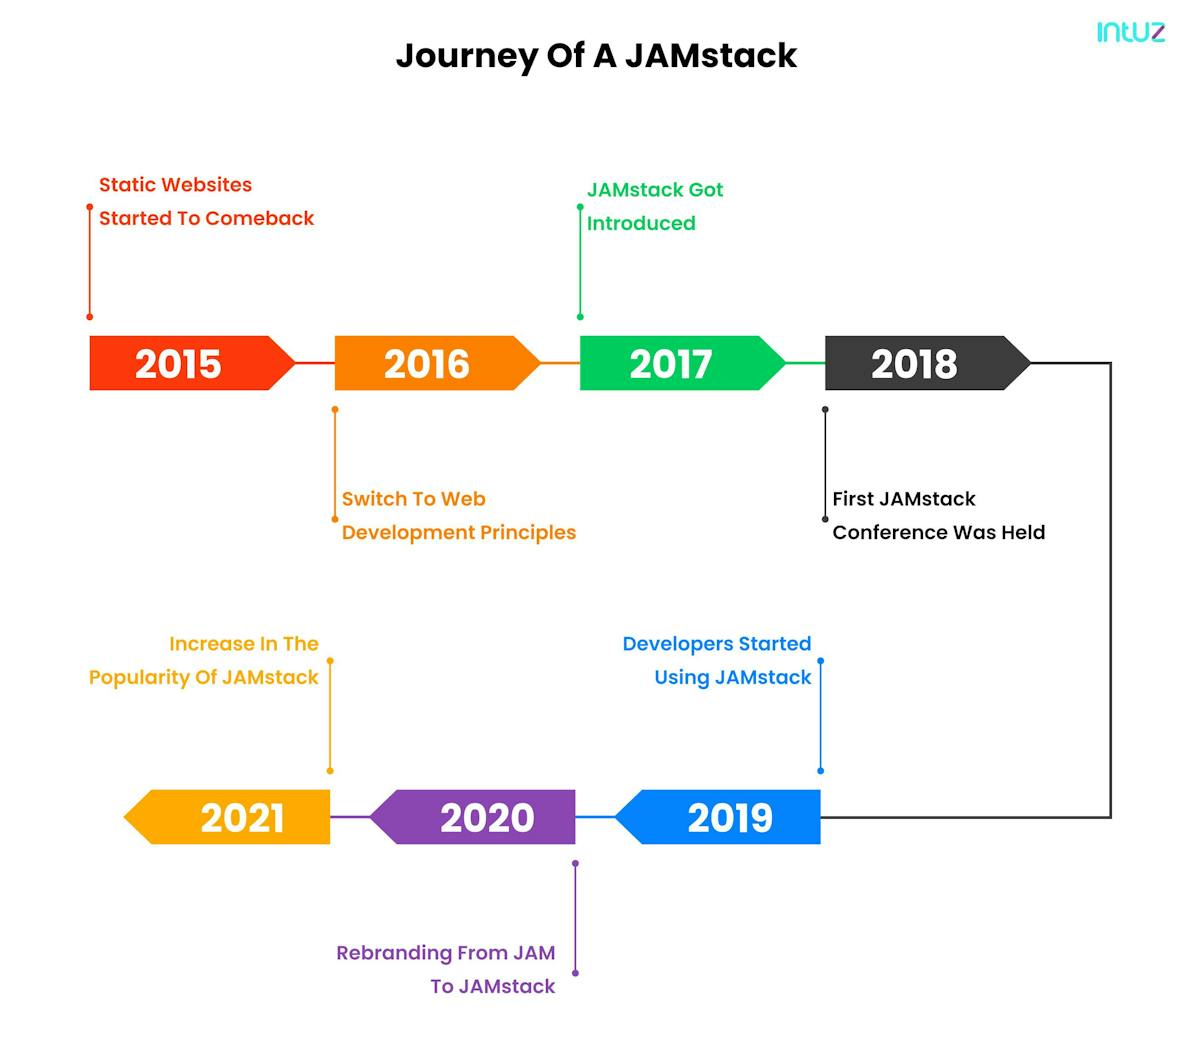 Journey of A JAMstack